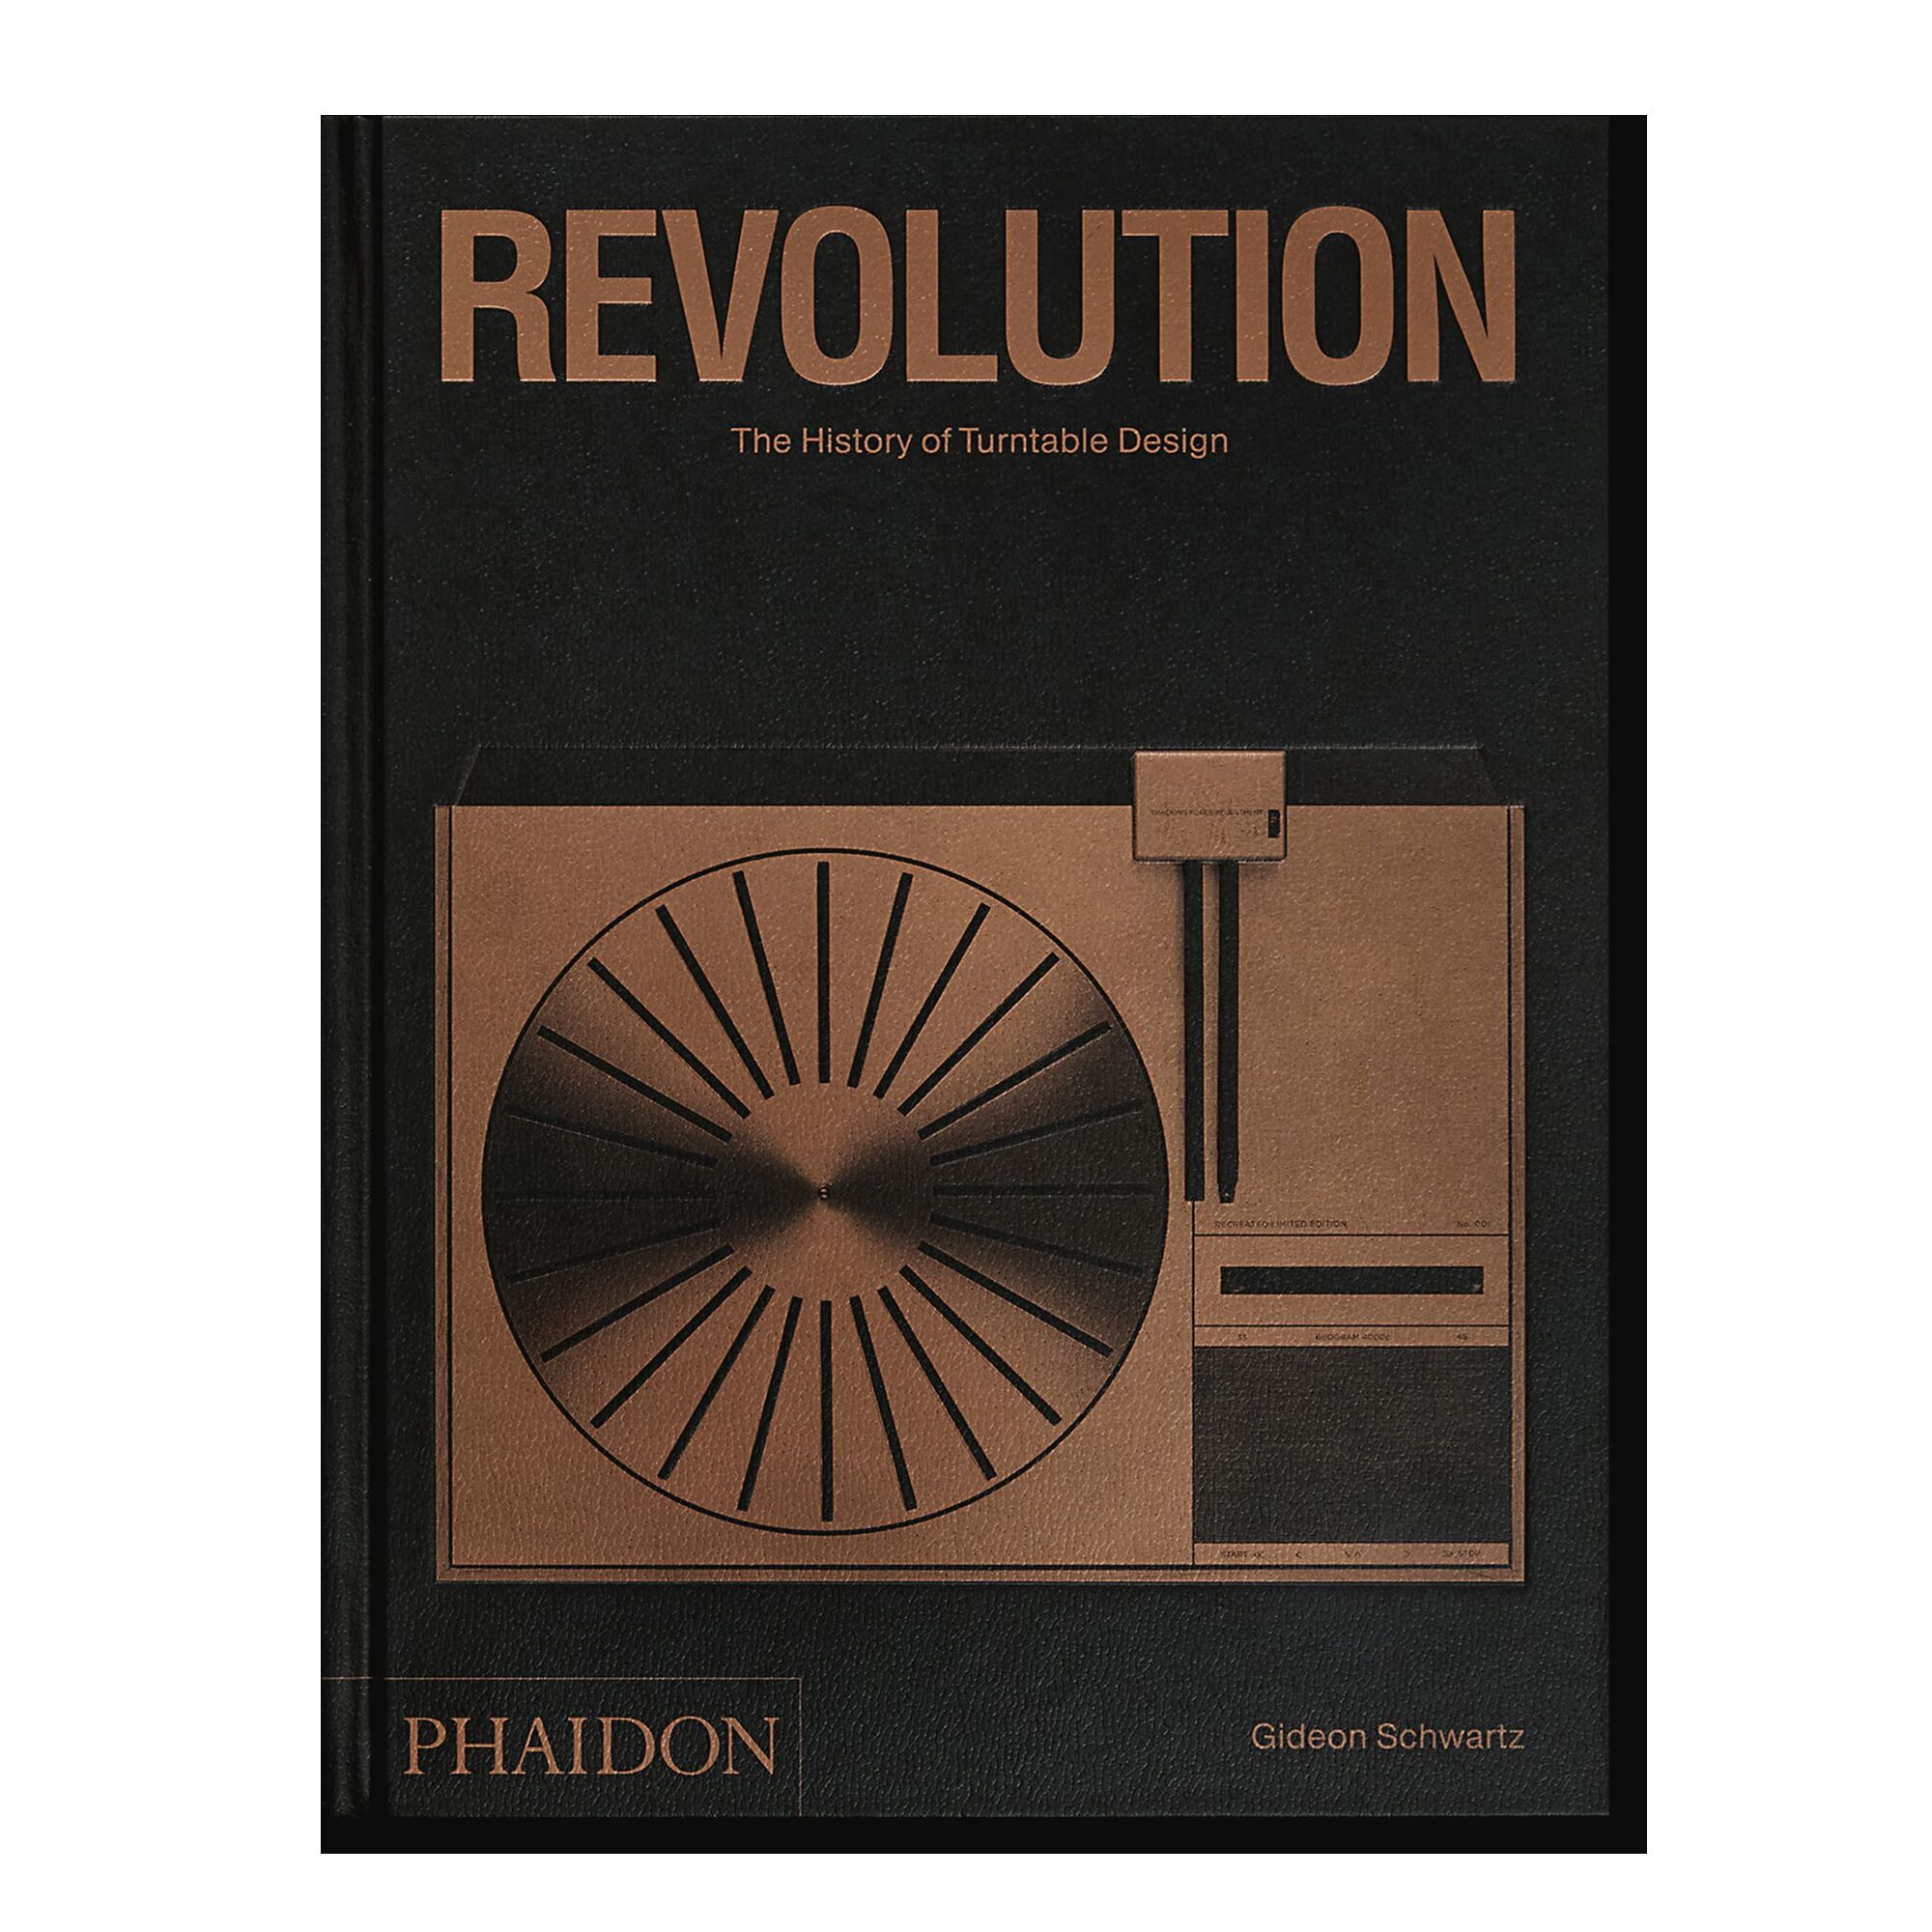 Revolution: The History of Turntable Design and Vinyl Culture